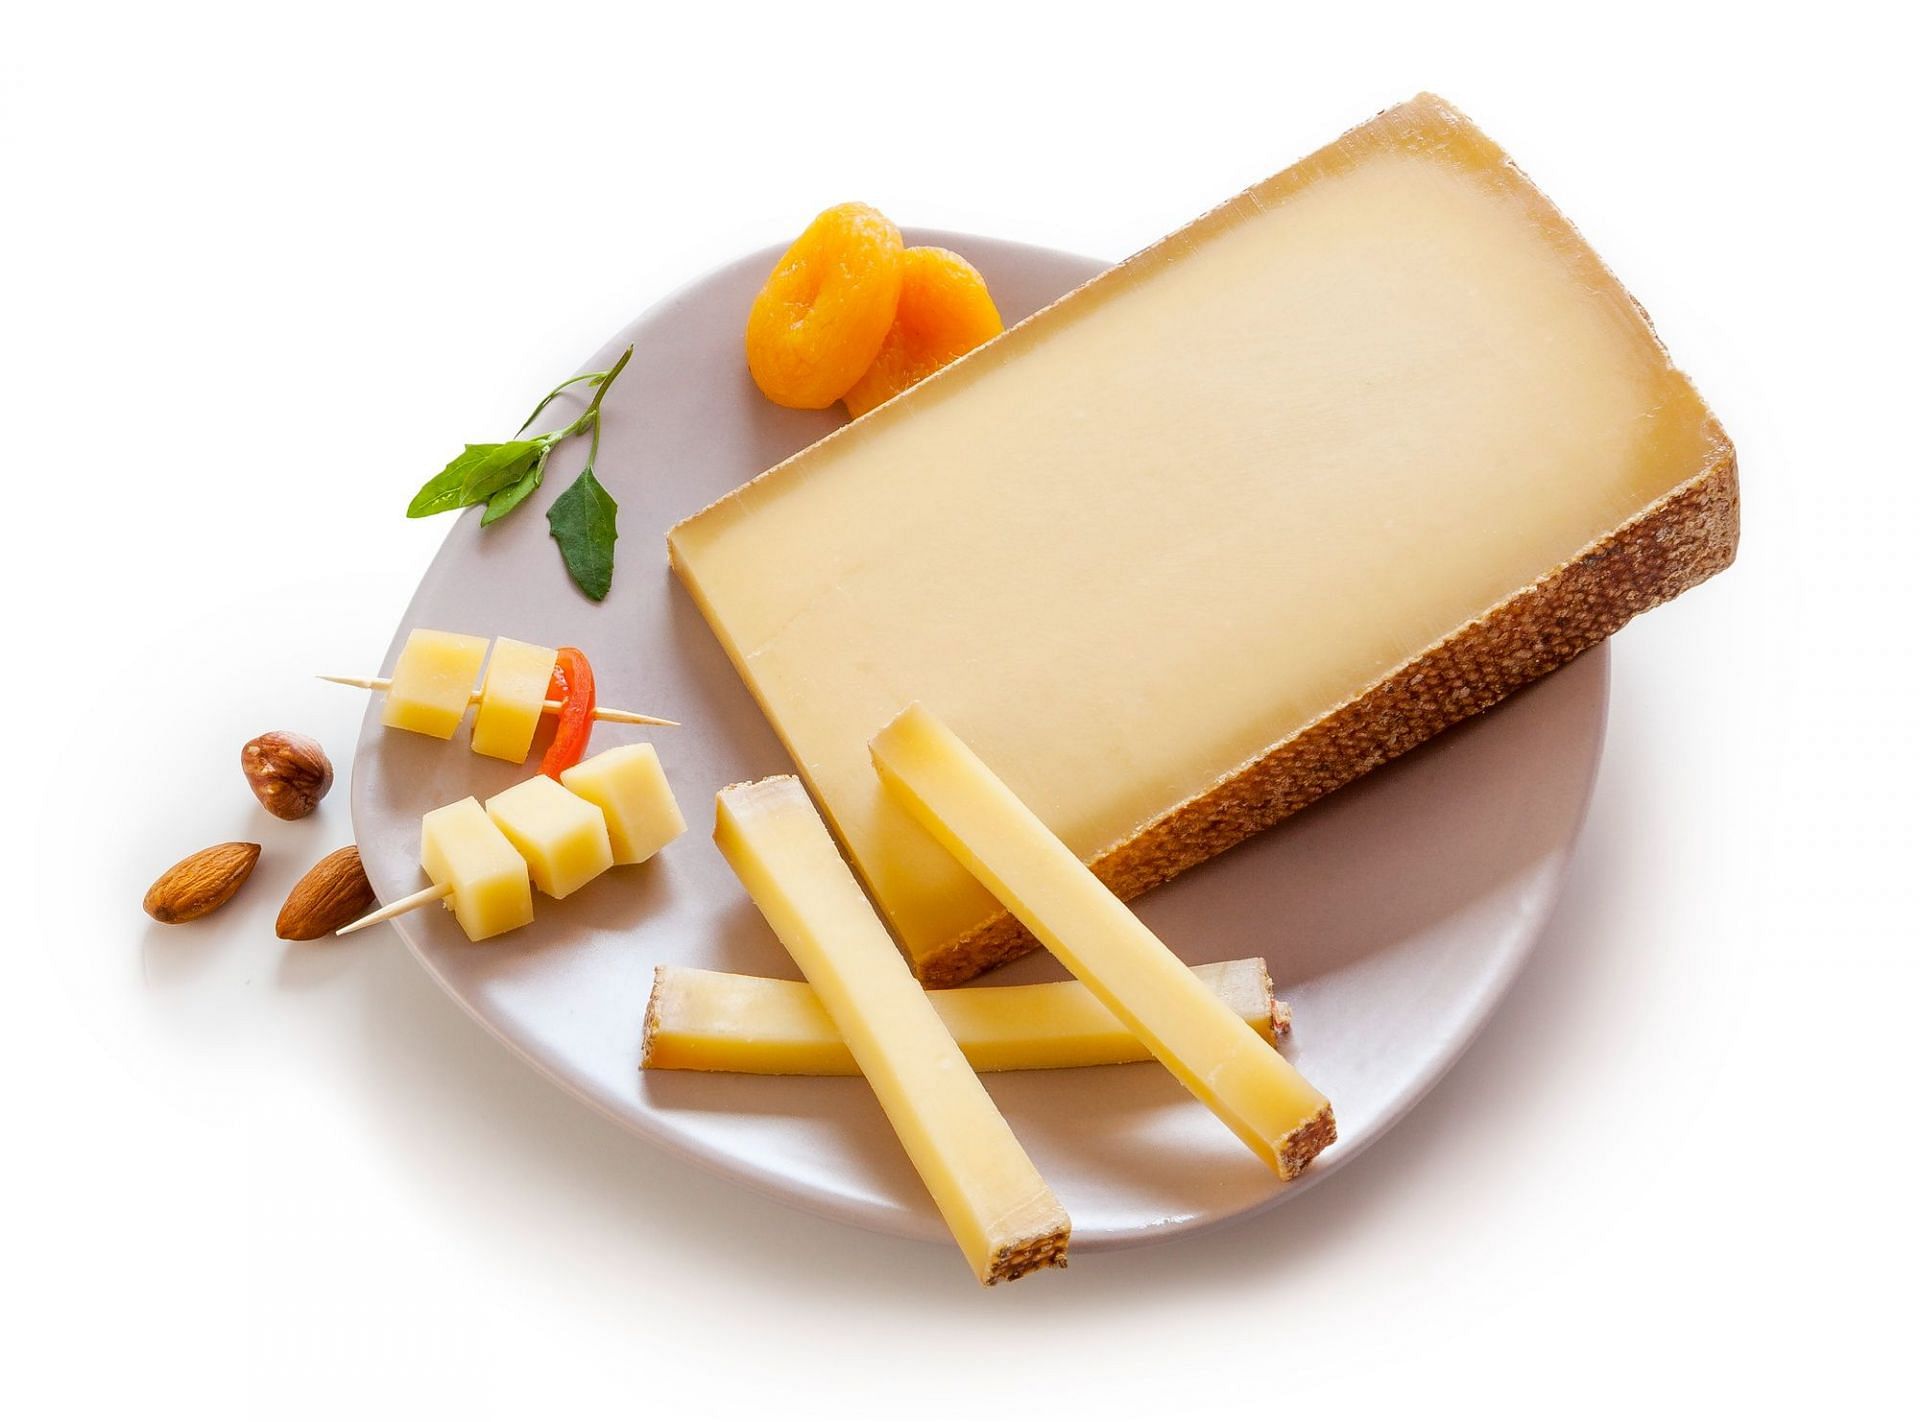 Did you know about Gowda cheese? (Image by vwalakte on Freepik)